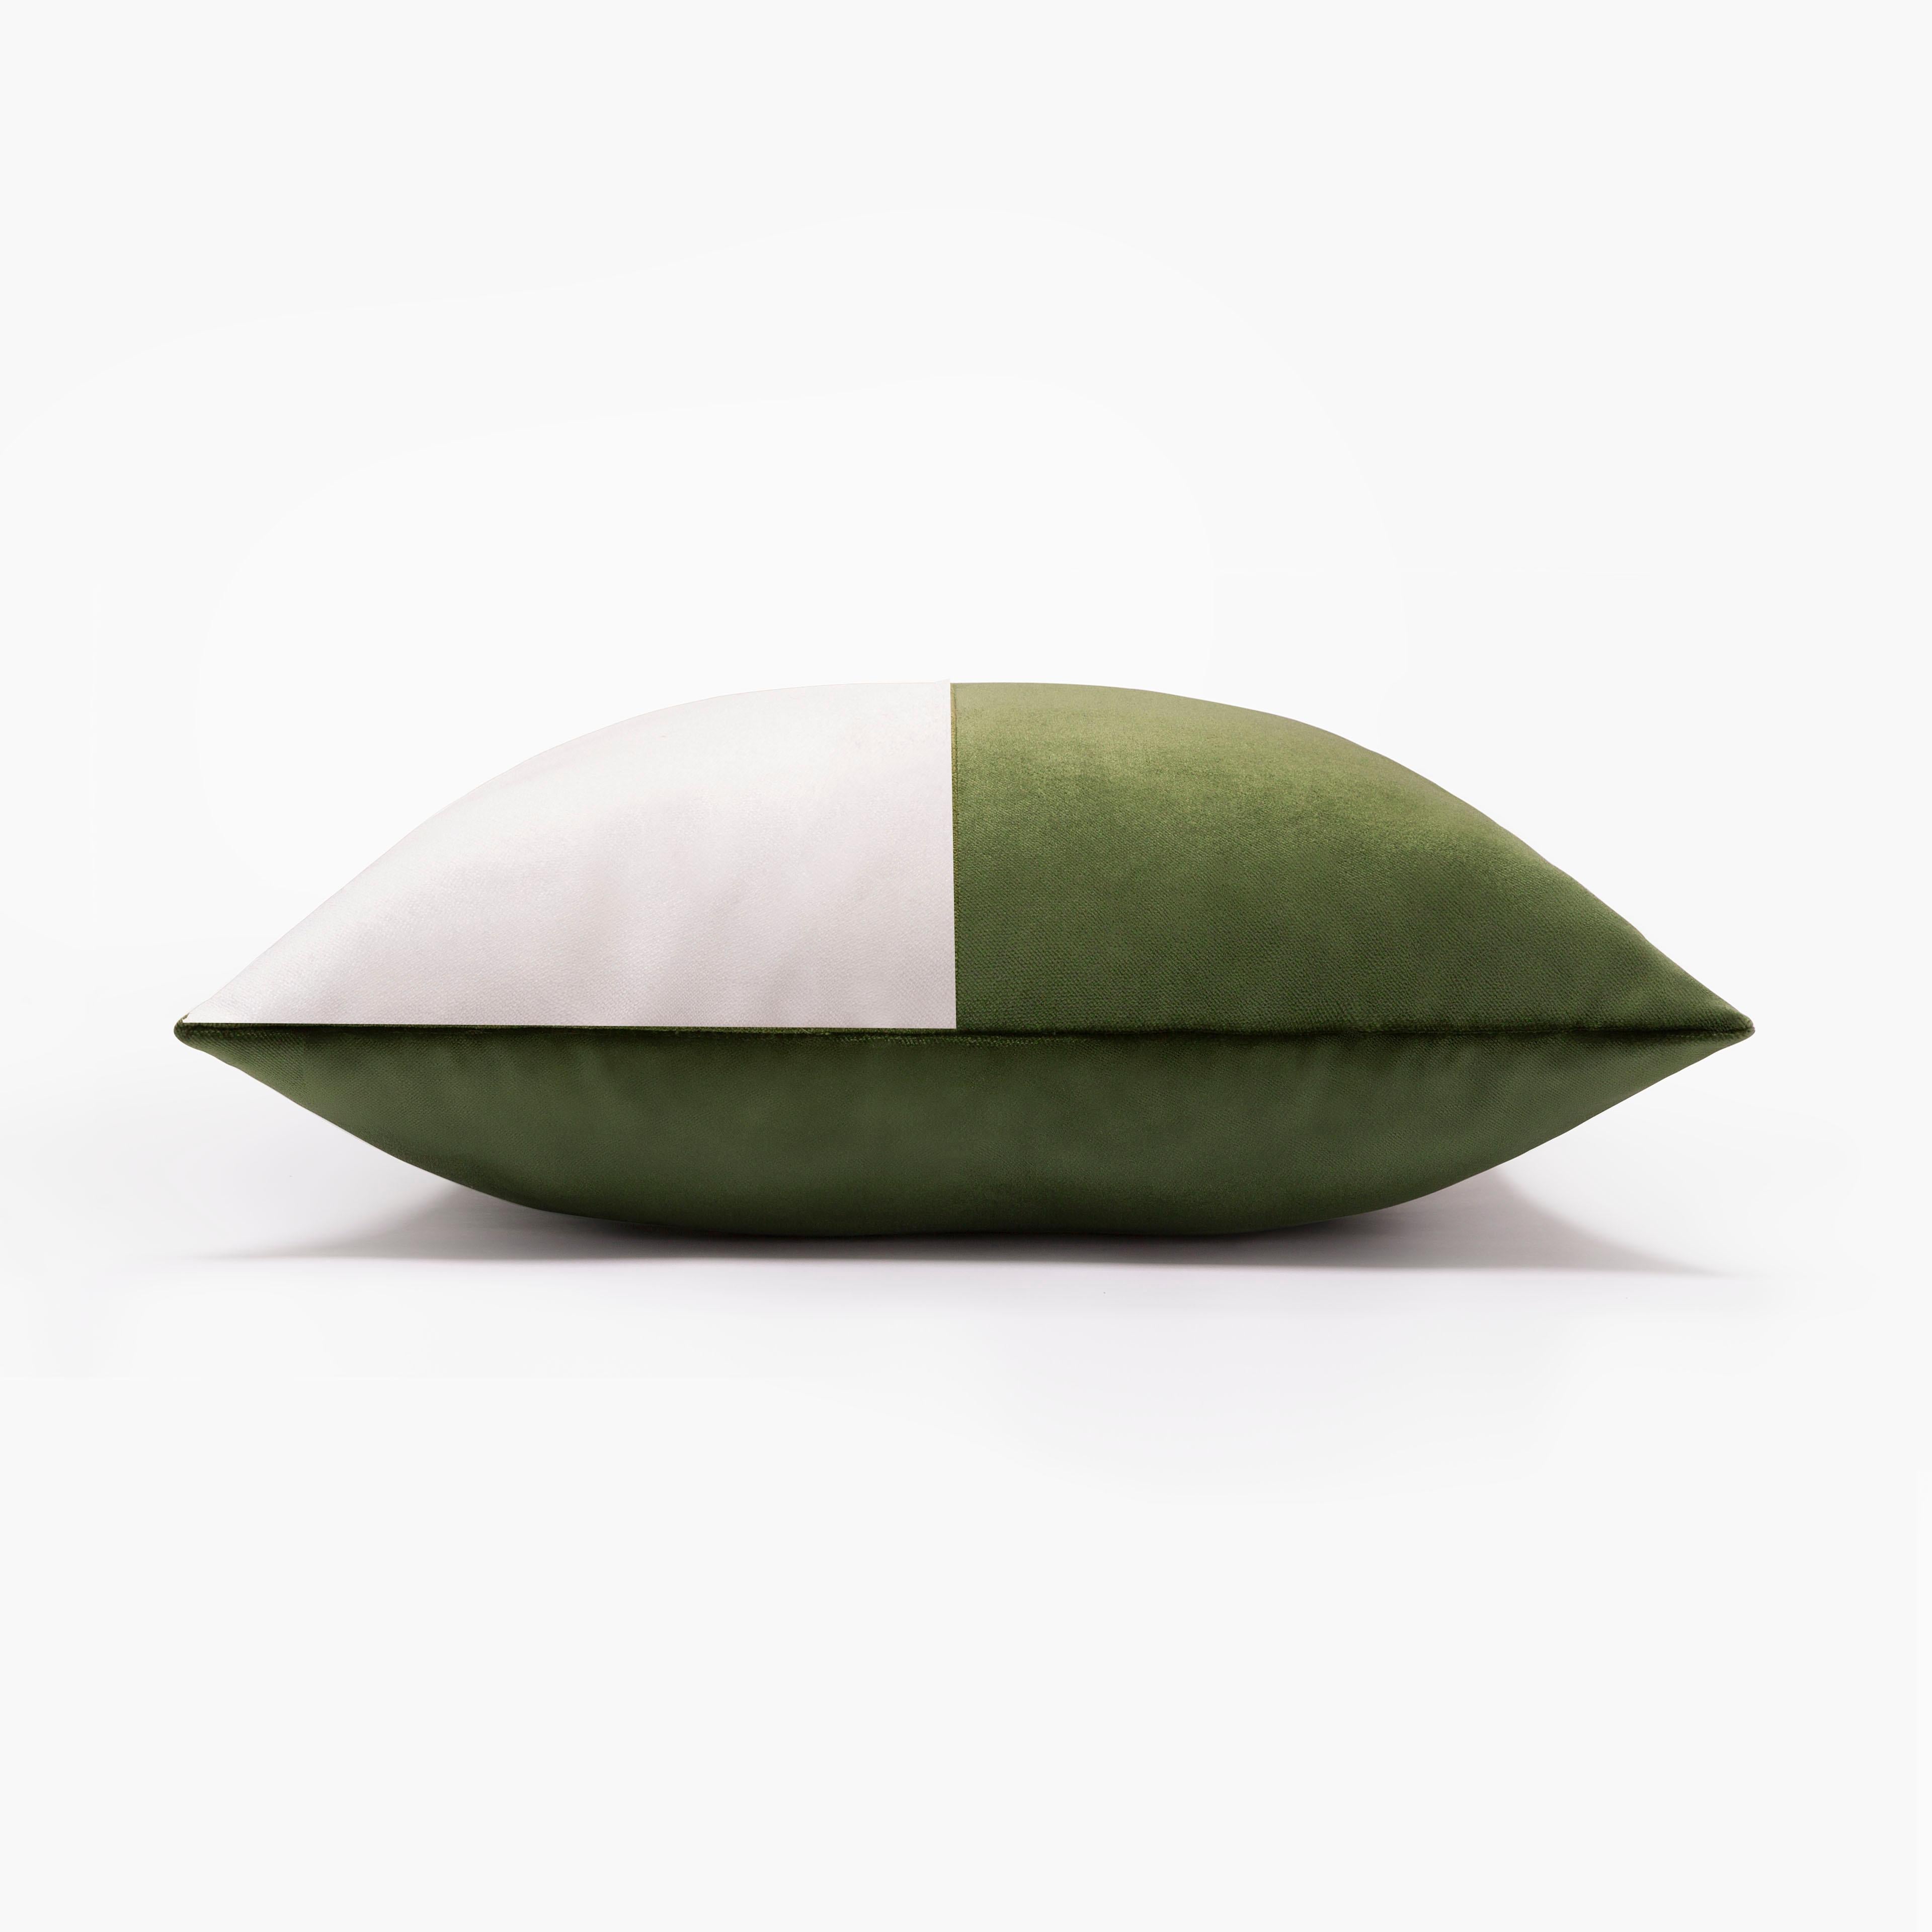 The geometrical shape of this elegant cushion is adorned with a stunning cover that is sophisticated and fresh, adding a delicate decorative accent to a modern living room. 
The contrasting color and aesthetic balance of this accent piece make it